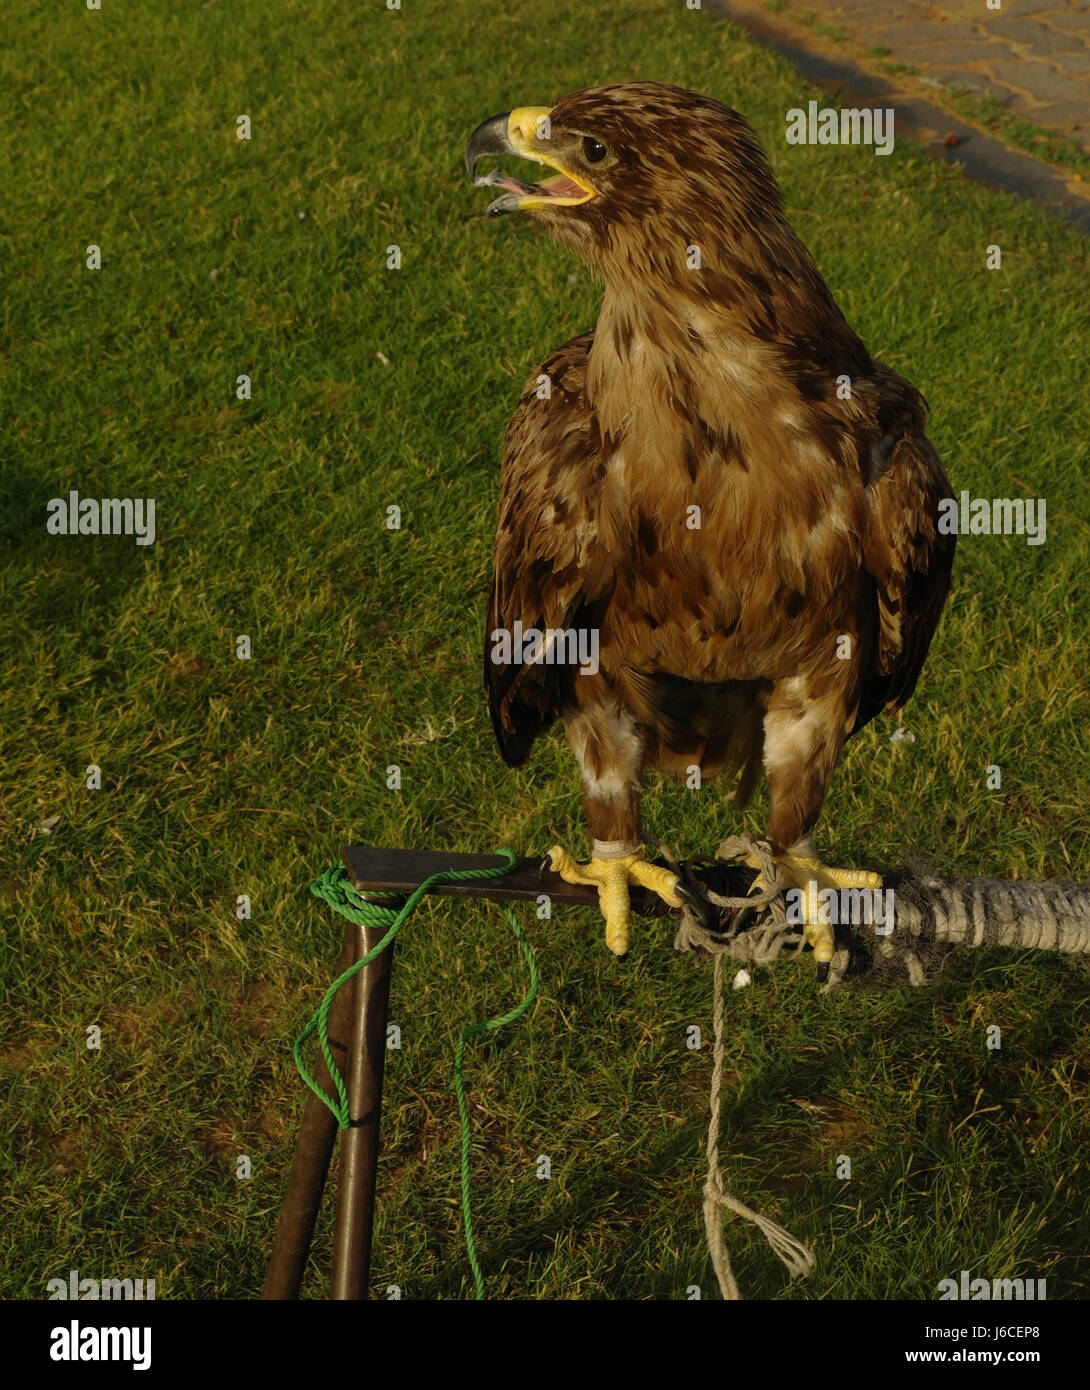 Common Buzzard, open mouth, head turned right, standing tethered metal stand on grass by paving stones, Al Badayer, Dubai-Hatta Road, Dubai, UAE Stock Photo